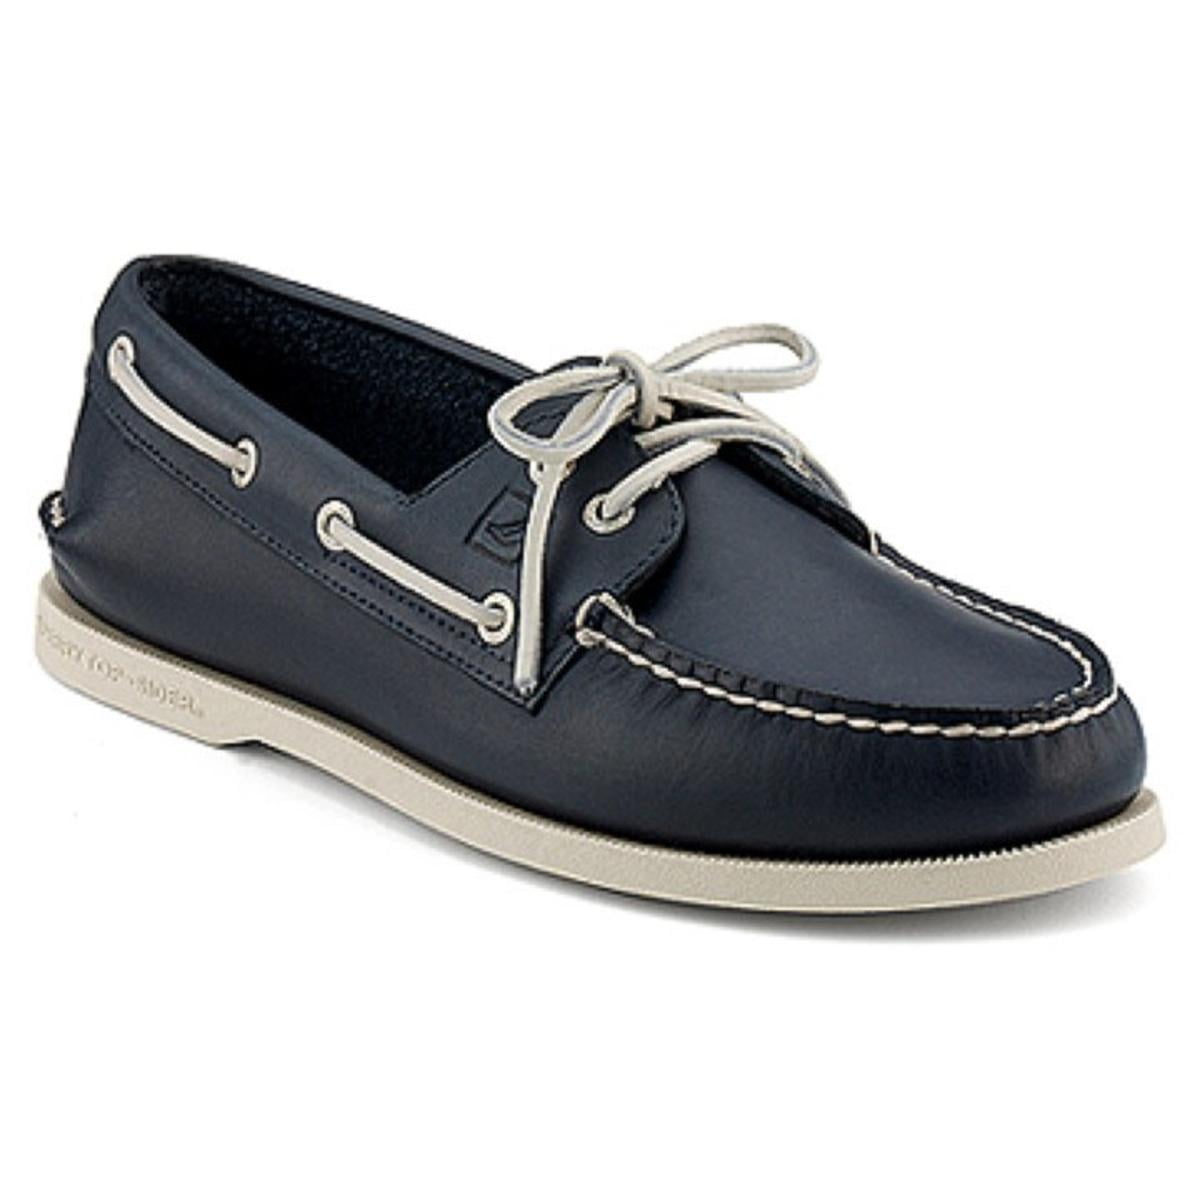 navy sperry boat shoes